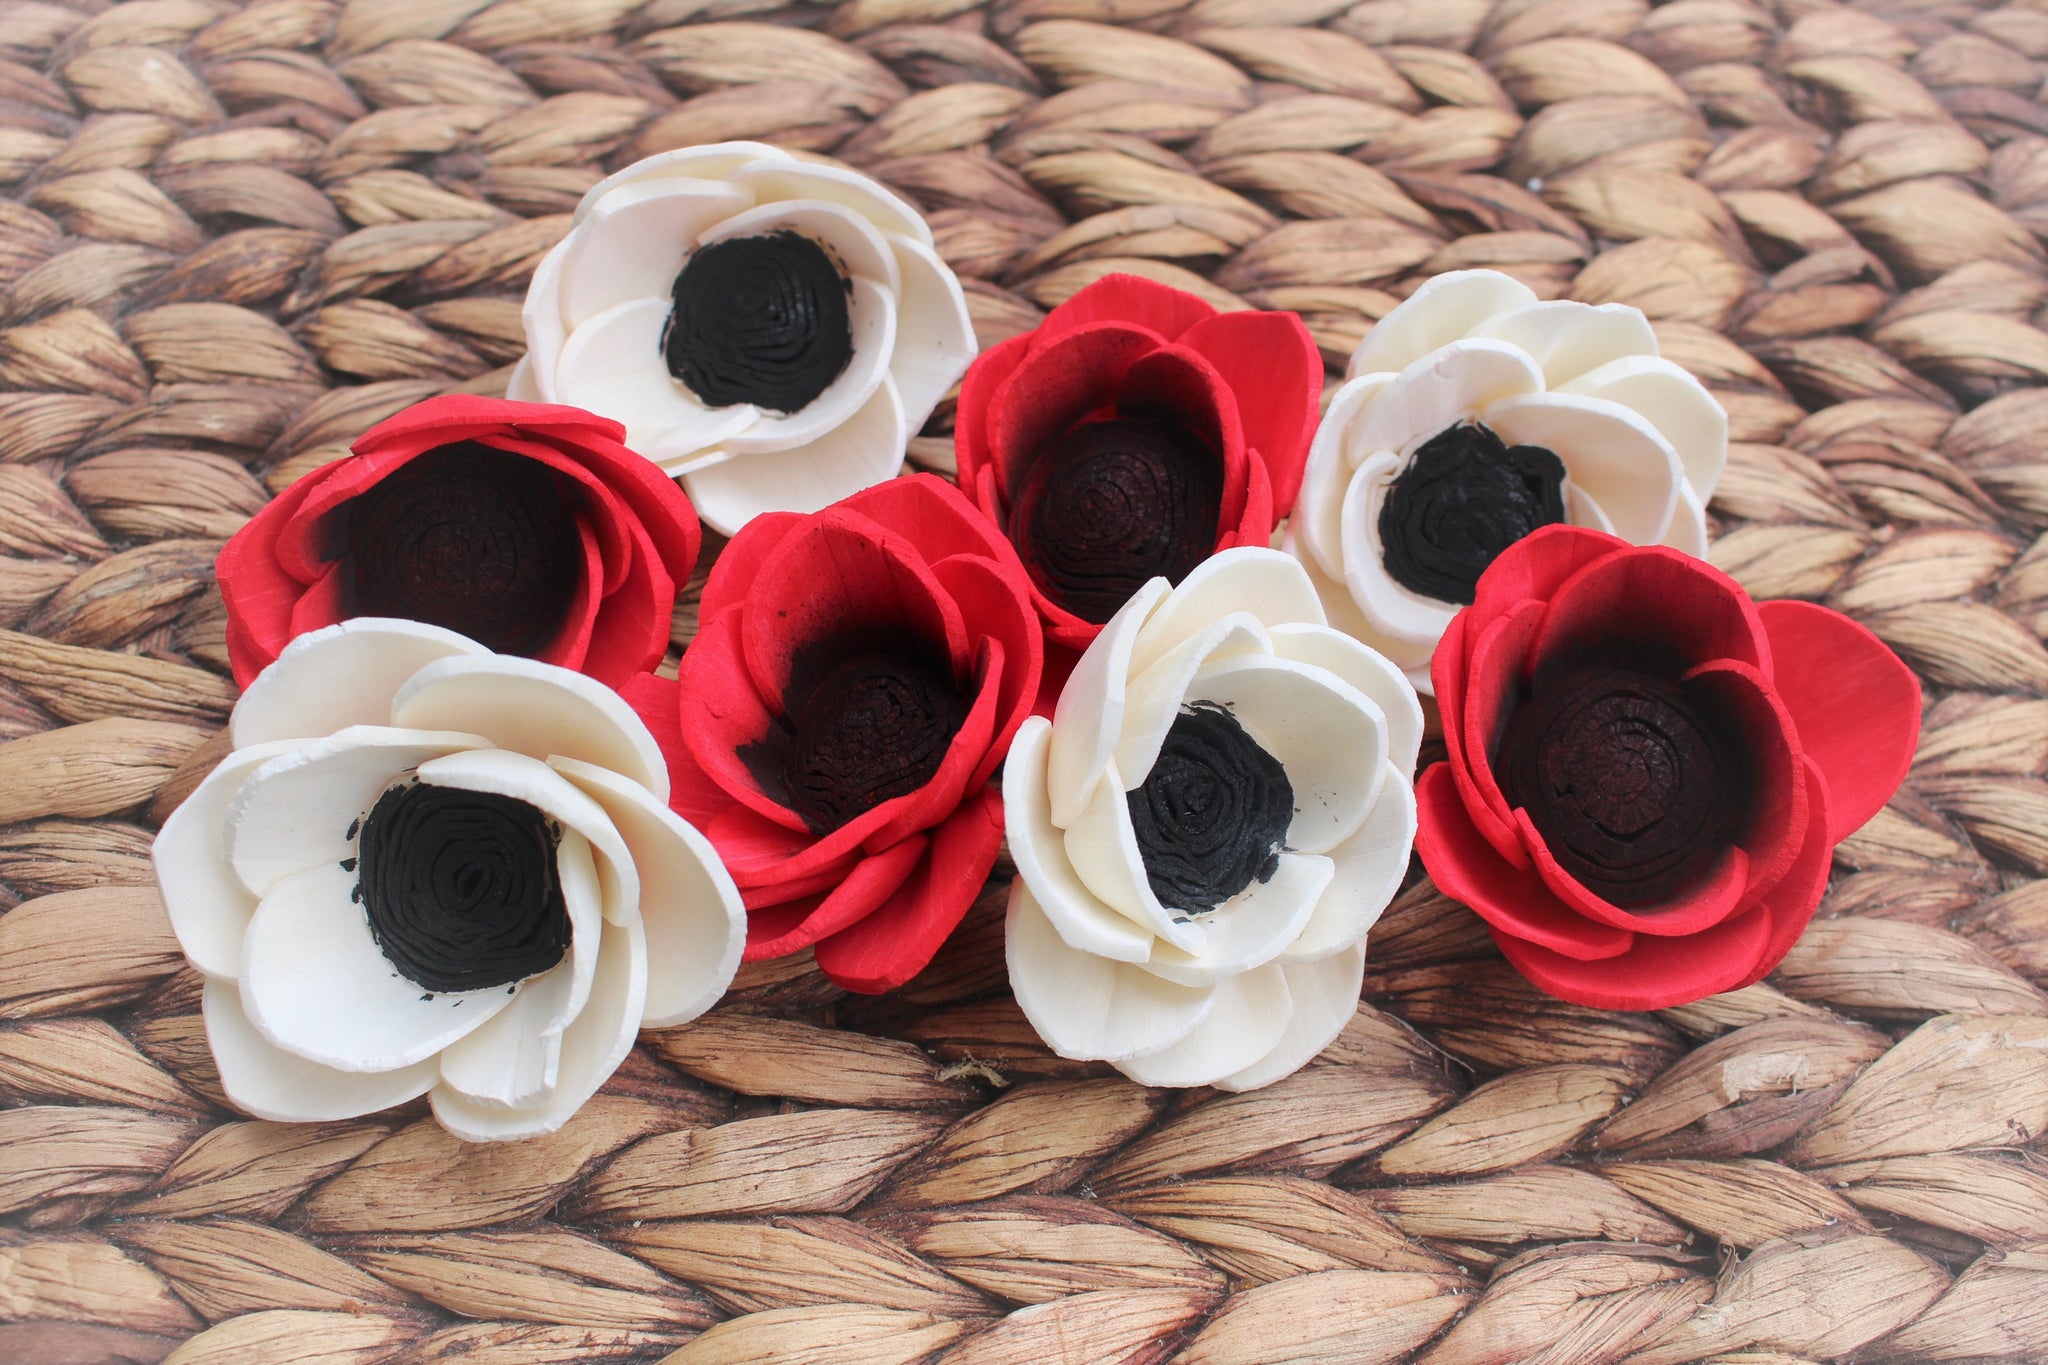 Red and White Poppies-Sola Flowers-Set of 8